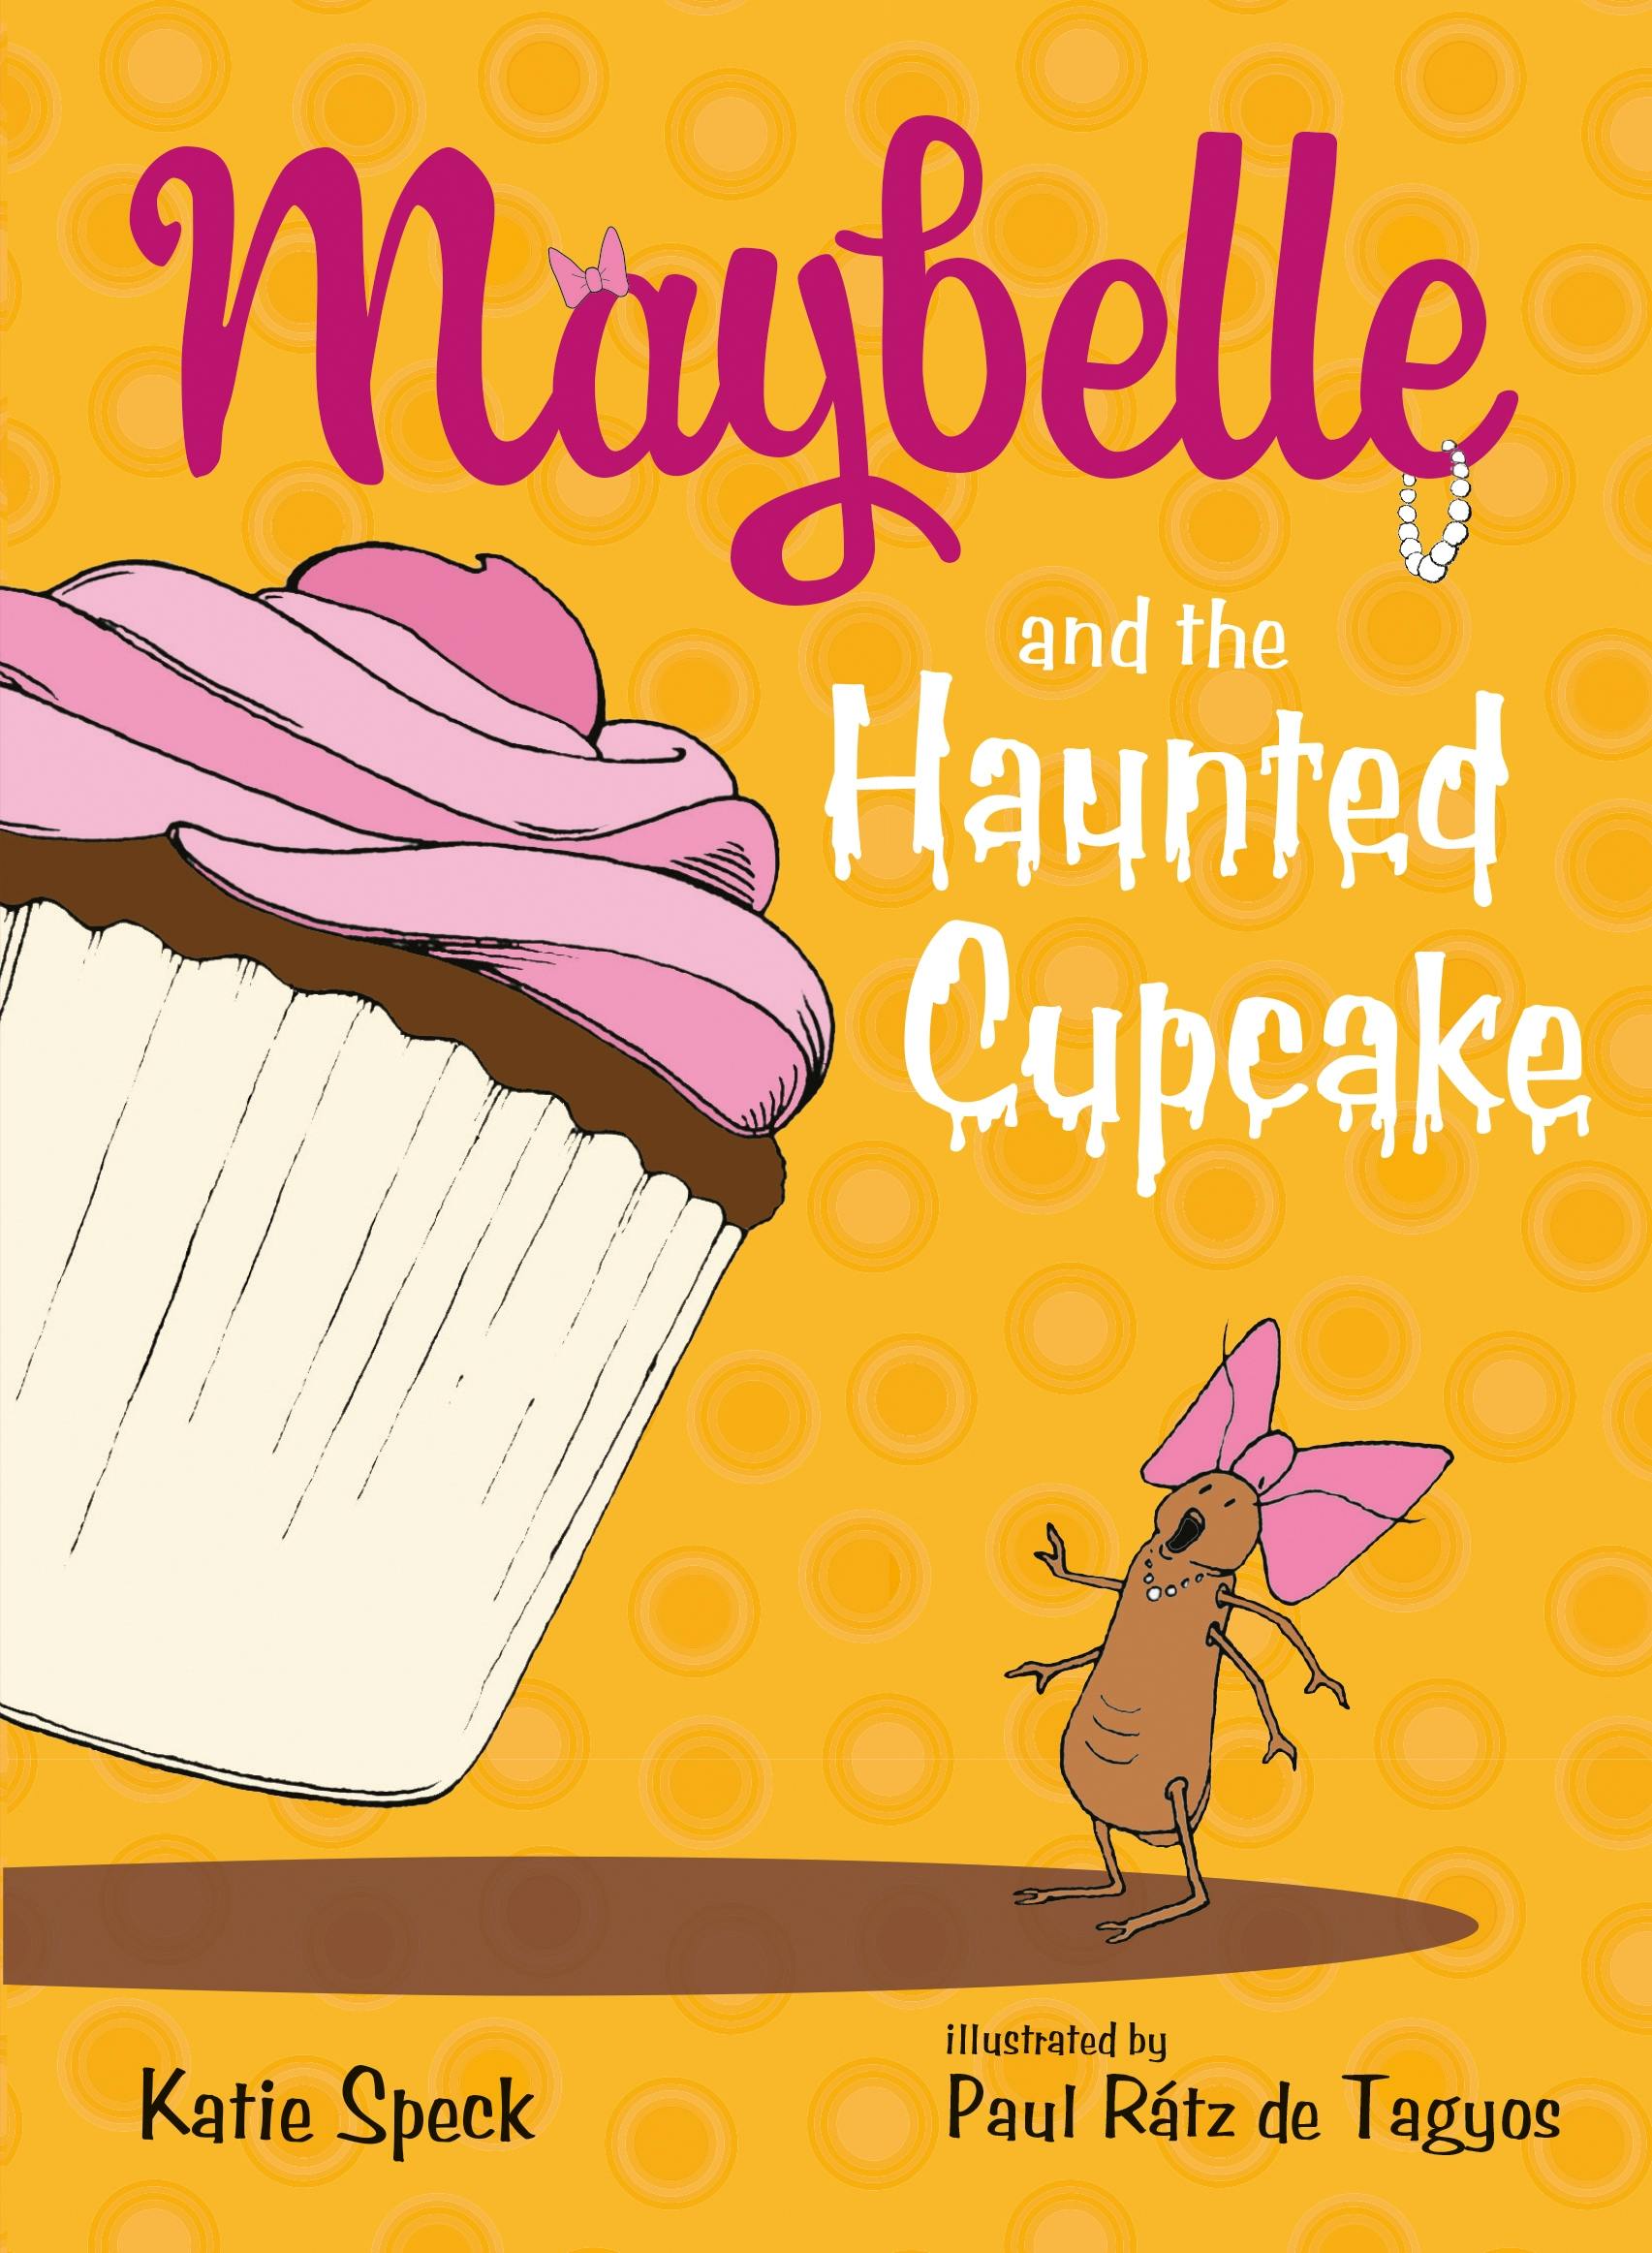 Image of Maybelle and the Haunted Cupcake